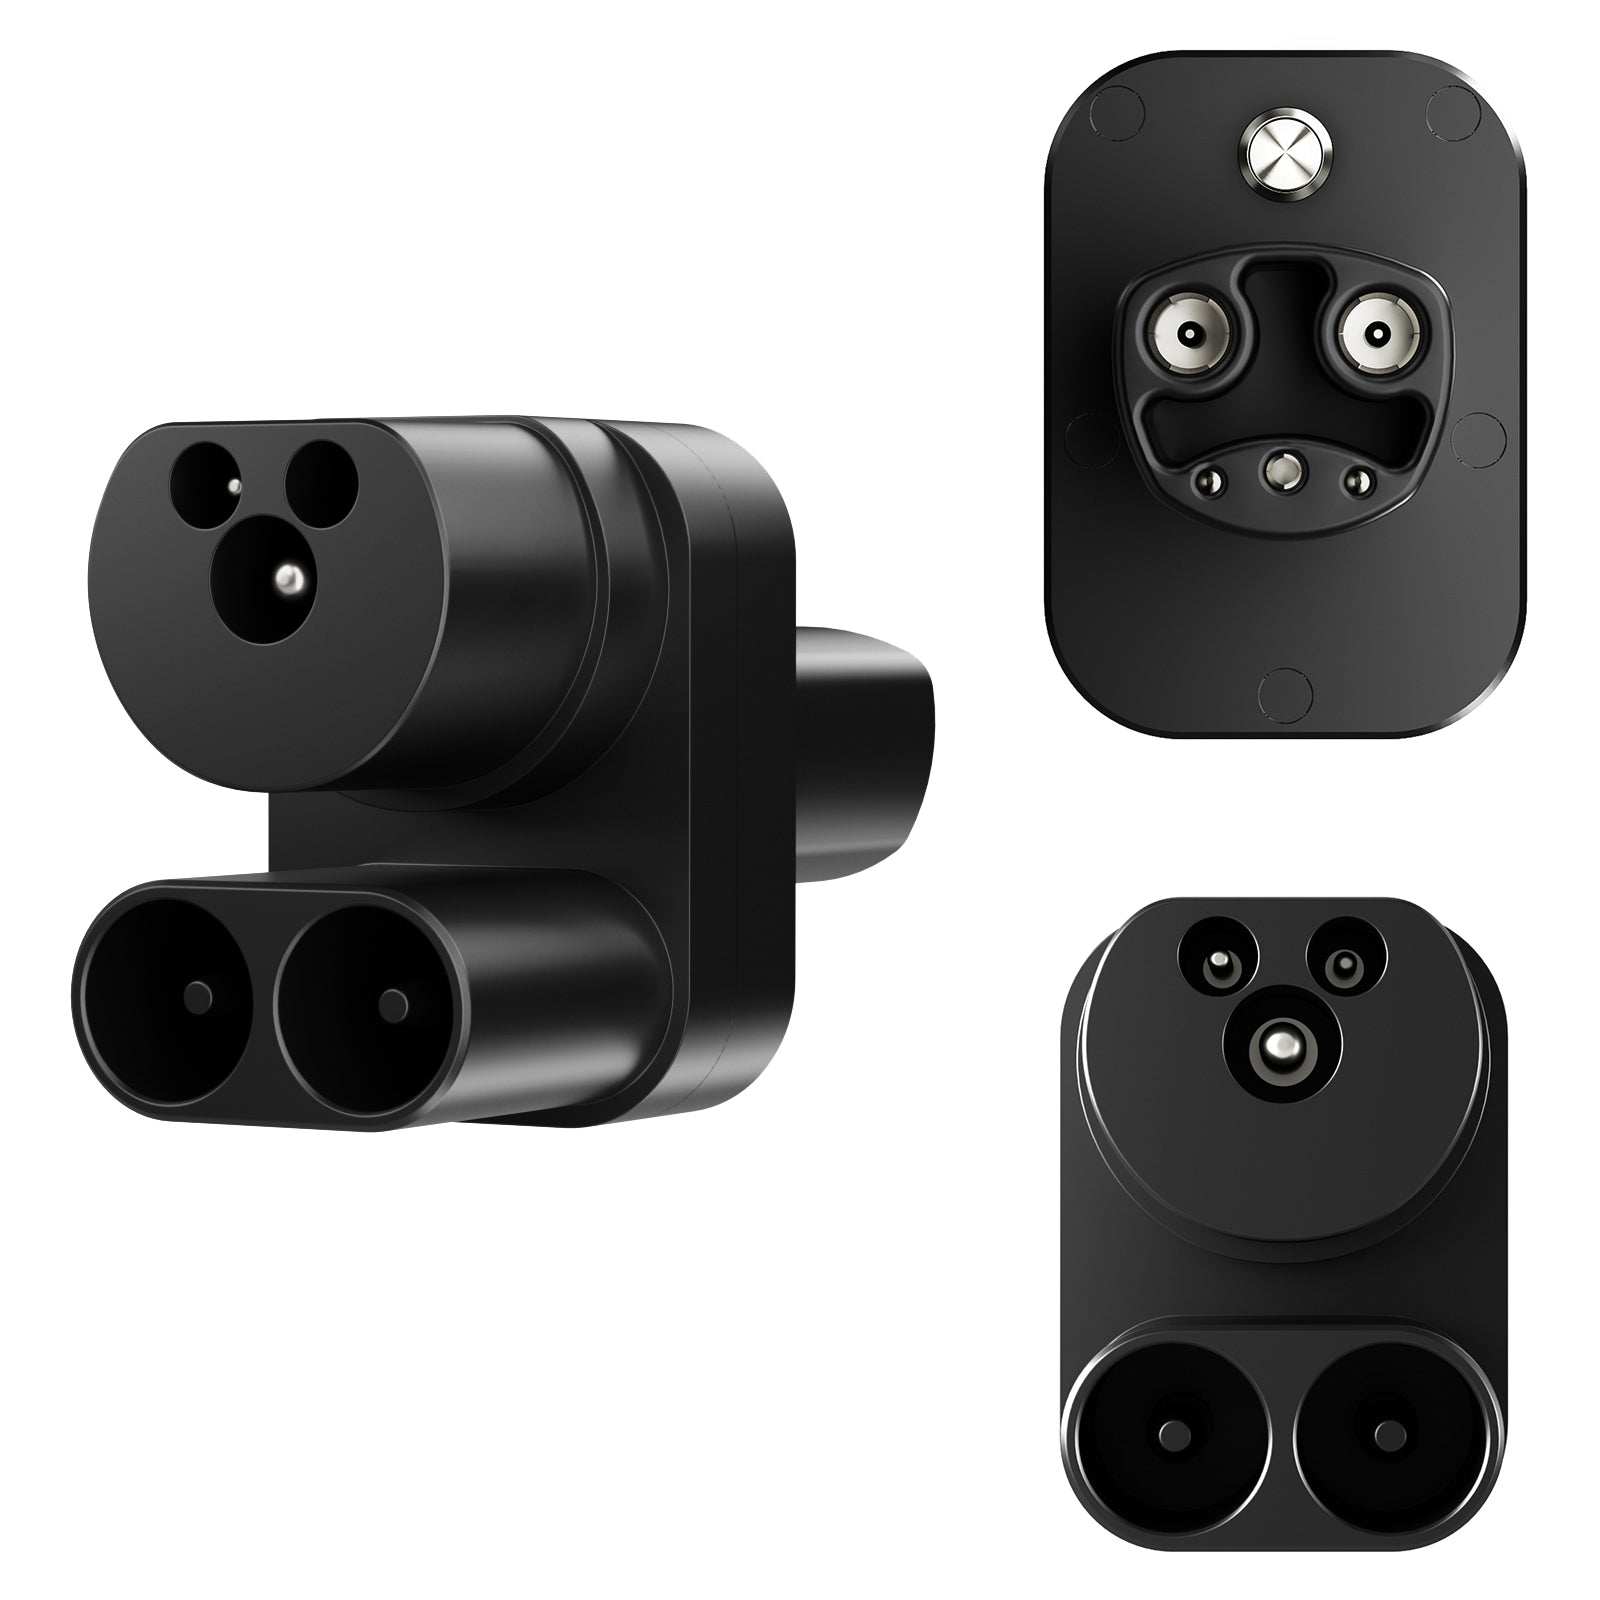 US Tesla CCS 2 Combo adapter for Model S,3,X,Y - for fast-charging -  Everything necessary for EV charging - Hardware and Software!